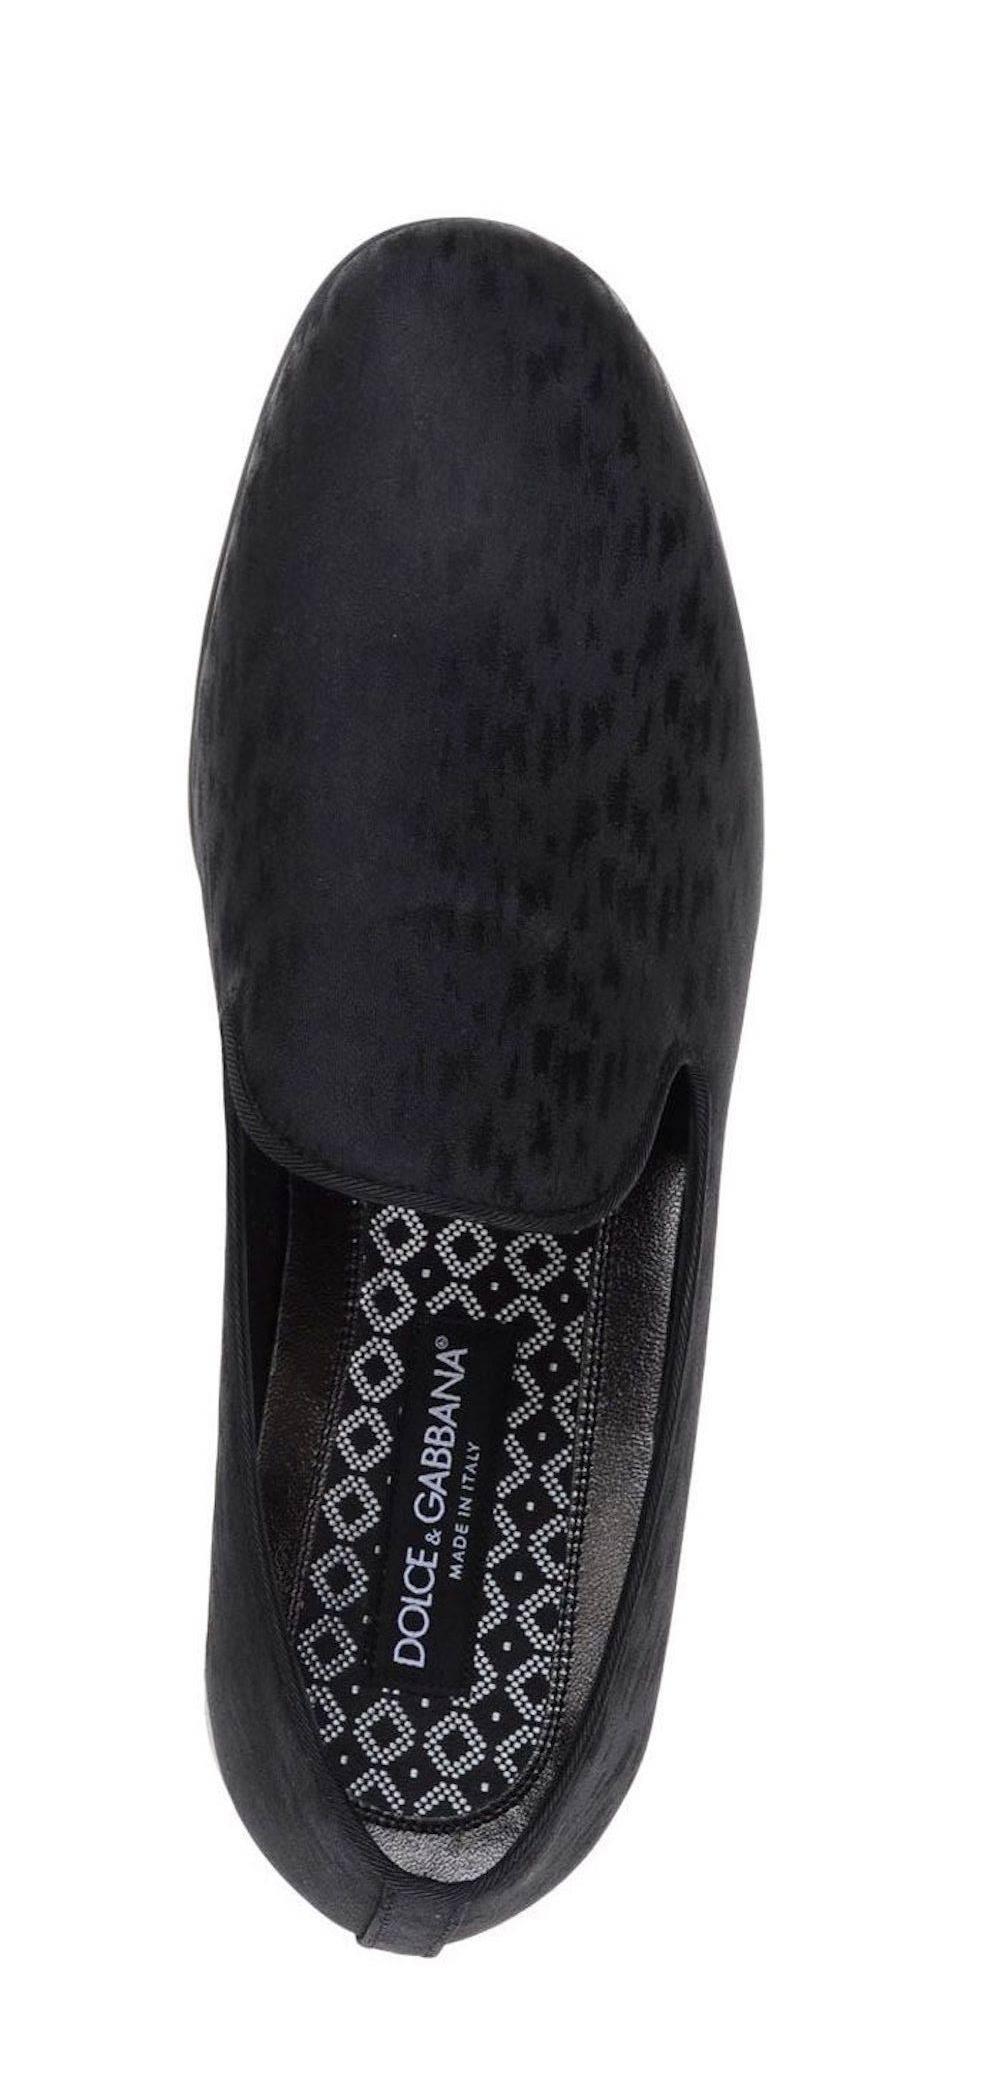 Dolce & Gabbana New Men's Black Patterned Smoking Slippers Loafers Shoes in Box In New Condition In Chicago, IL